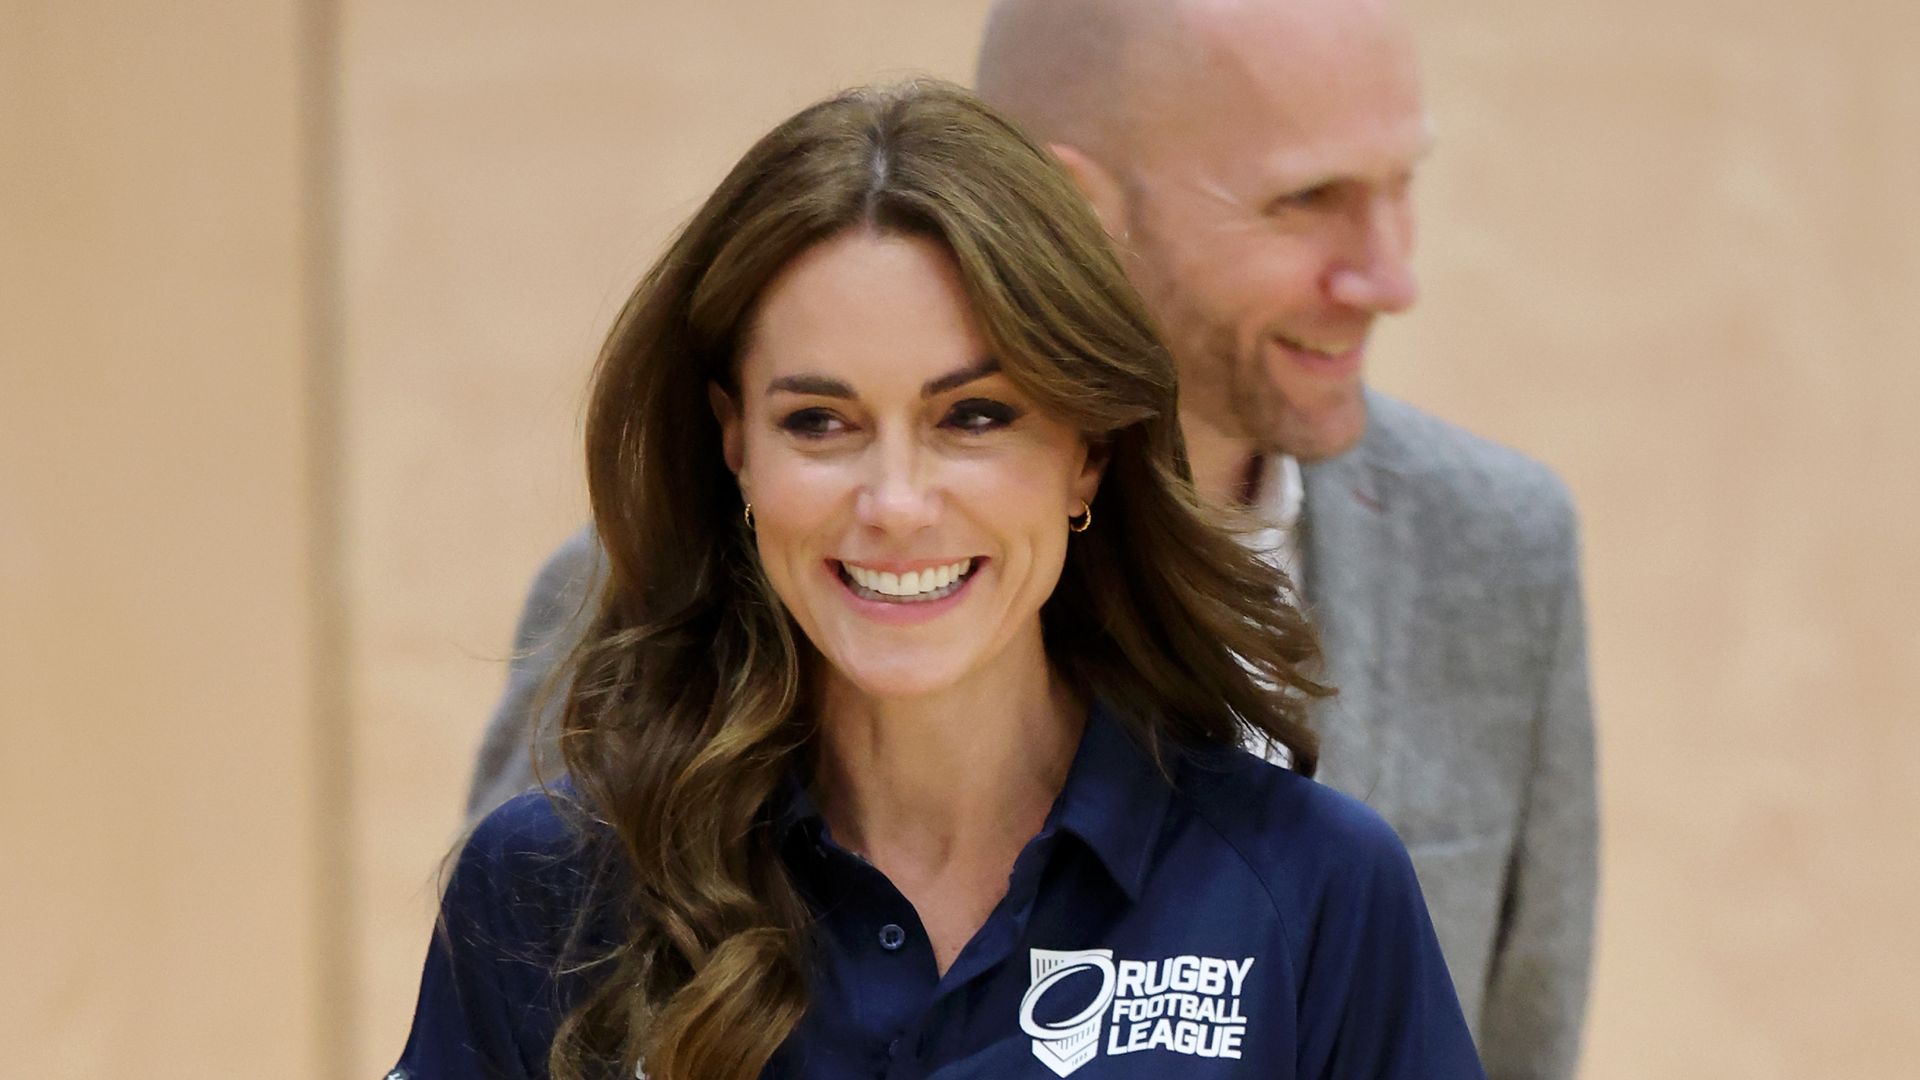 Kate Middleton arrives for Rugby League Inclusivity Day at Allam Sport Centr